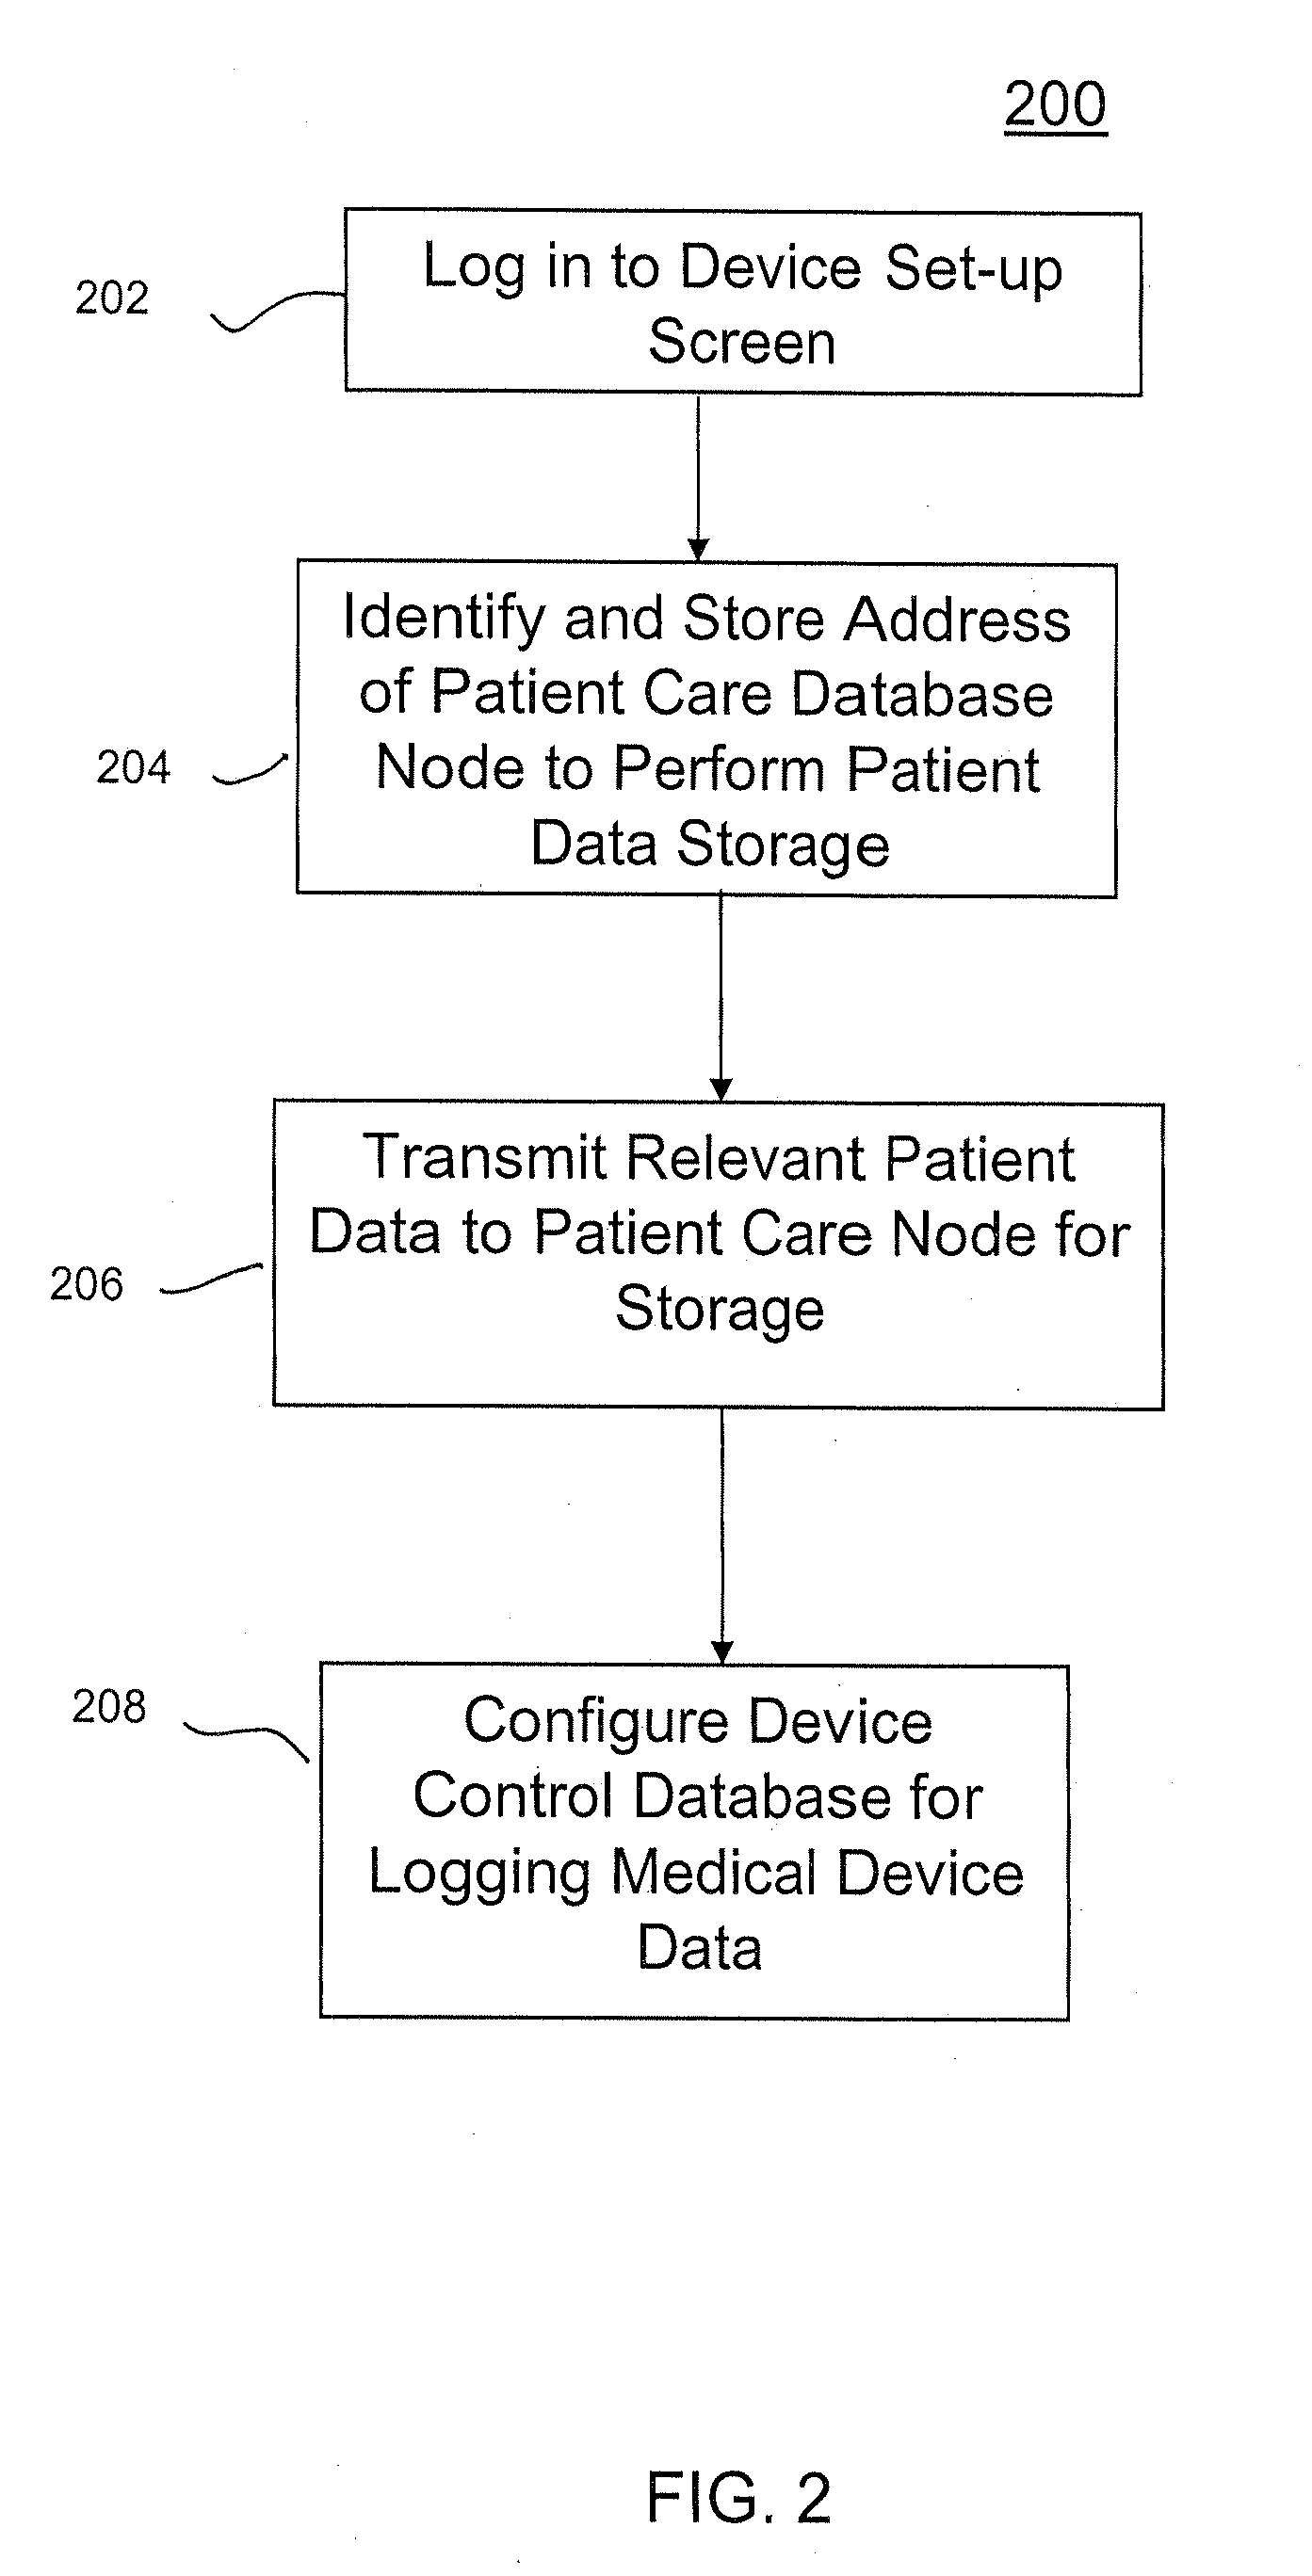 Remote Monitoring Systems for Monitoring Medical Devices Via Wireless Communication Networks